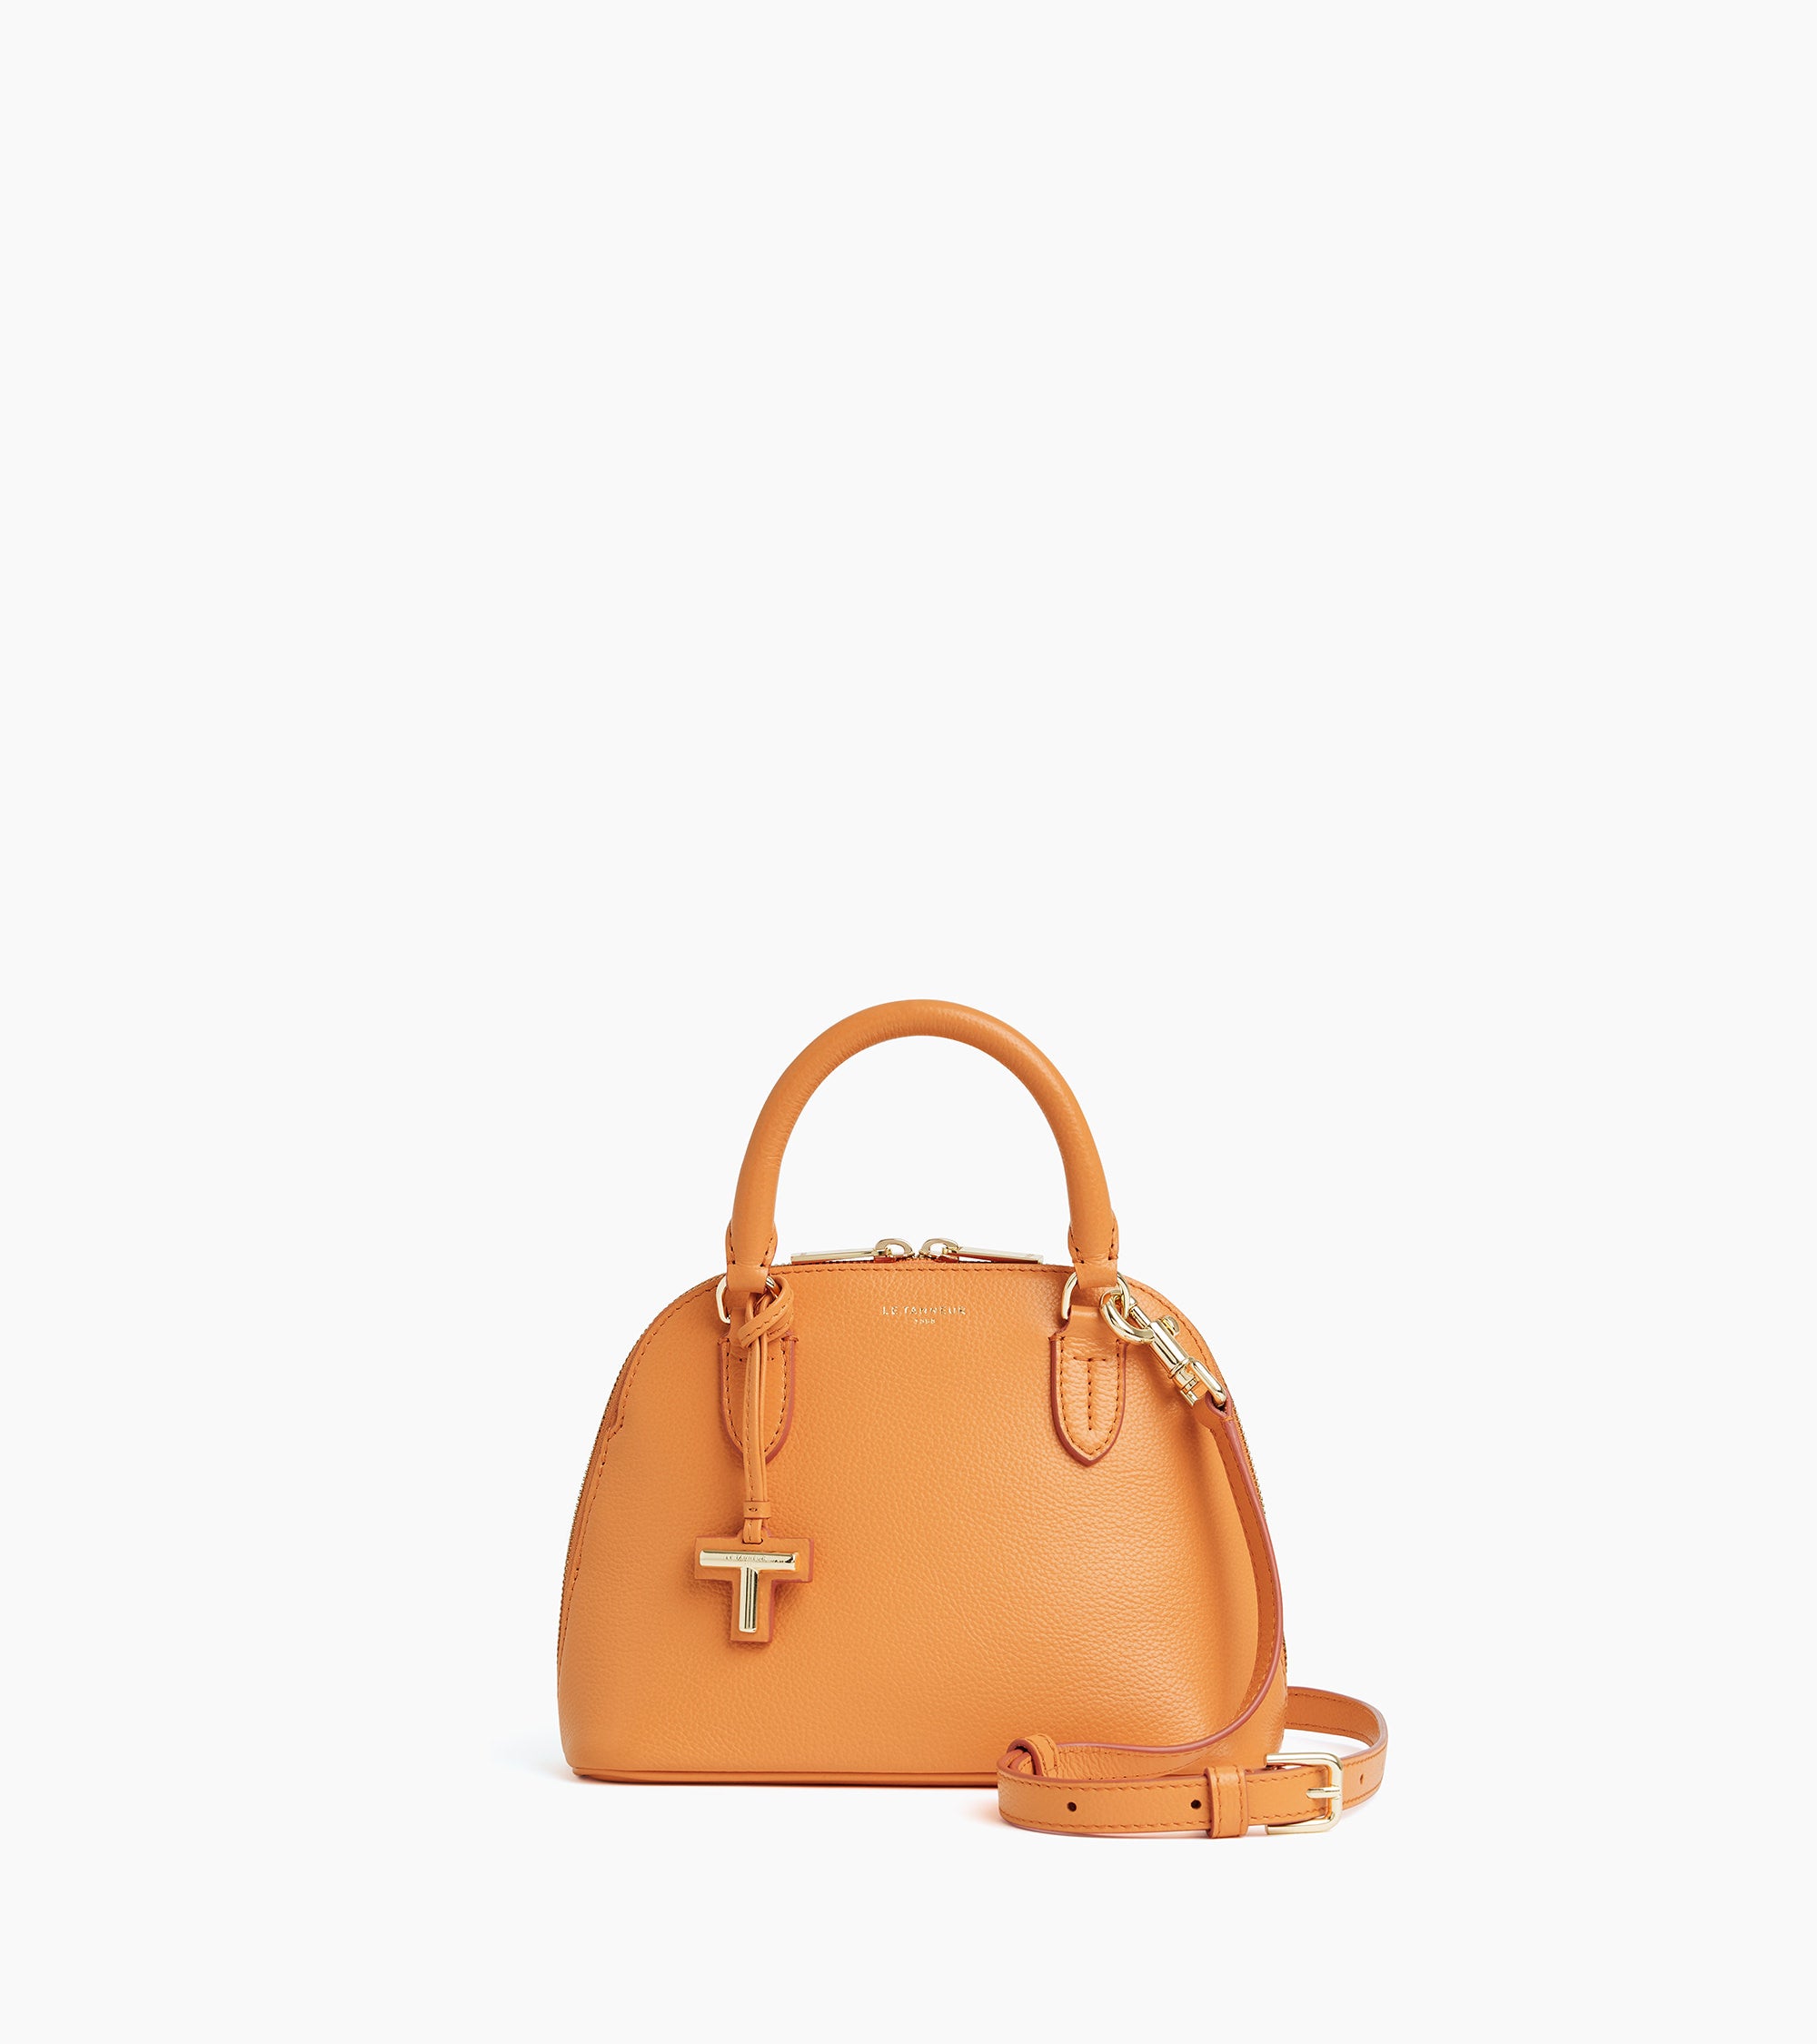 Gisèle small handbag in pebbled leather